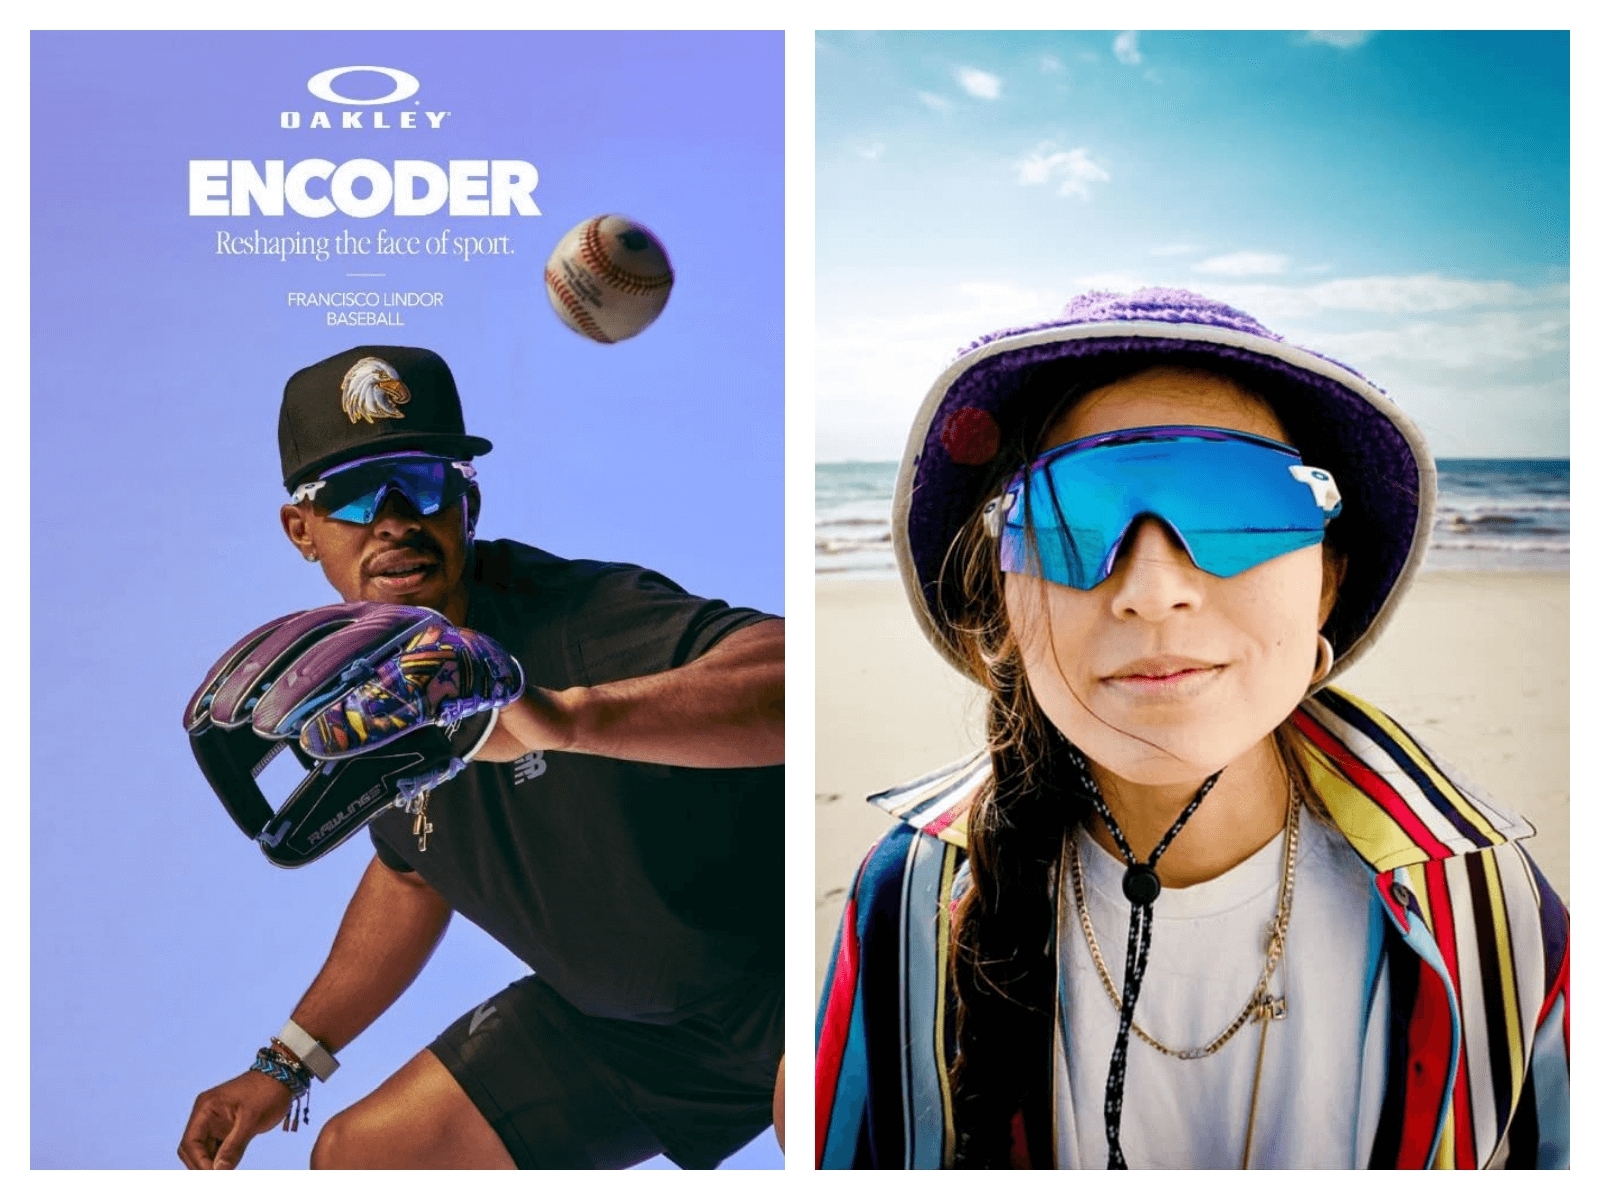 OAKLEY全新「KATO」、「ENCODER」系列，展現 “Be who you are” 的自信態度